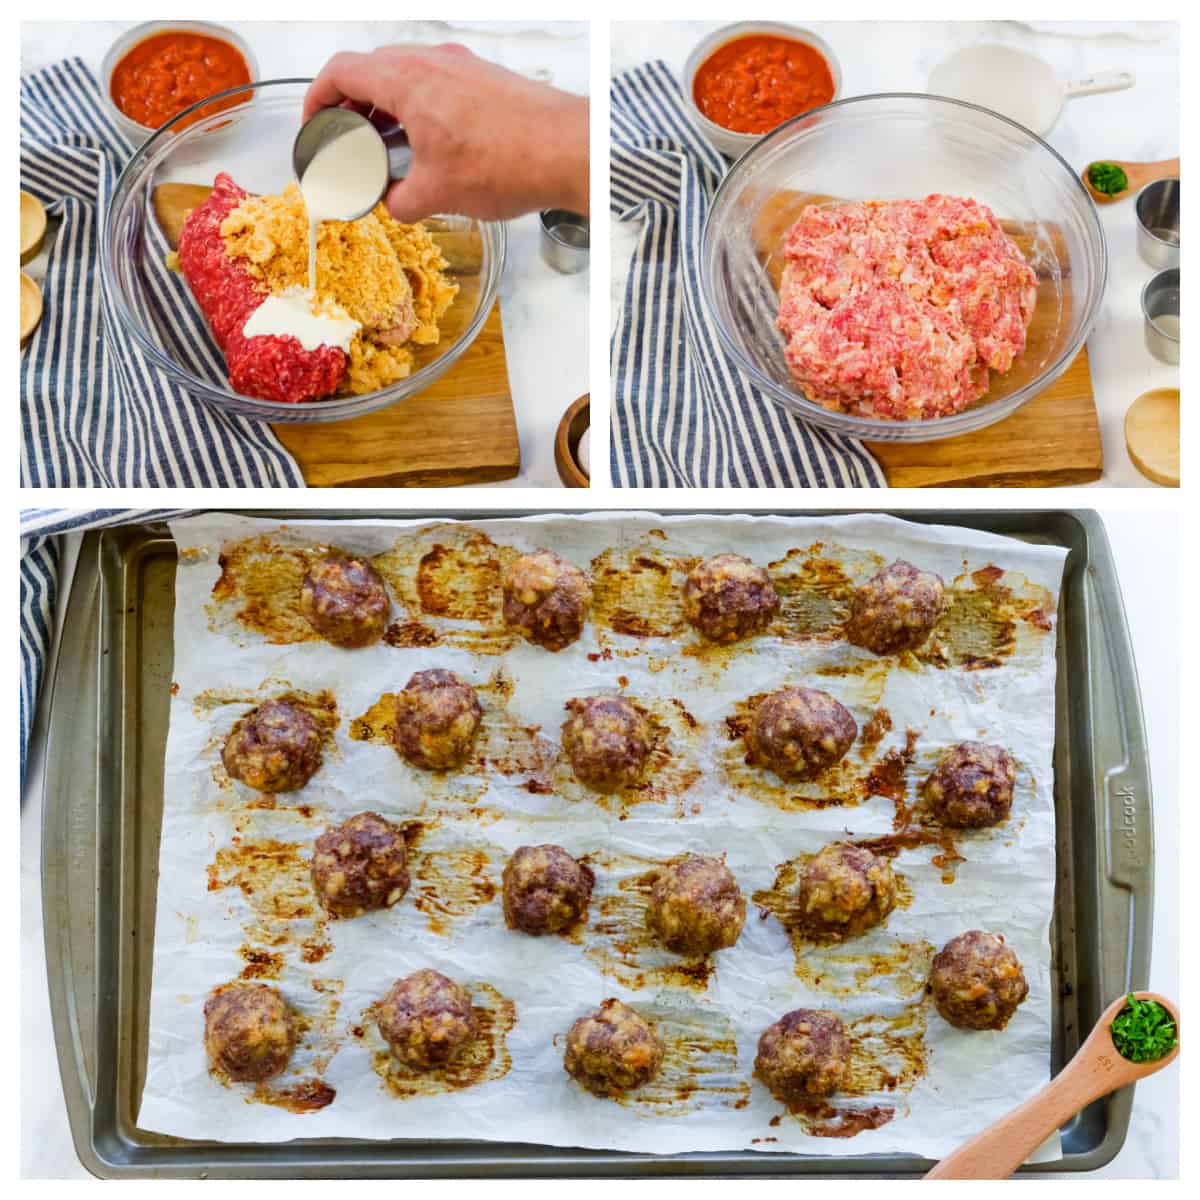 Collage showing how to make keto meatballs.